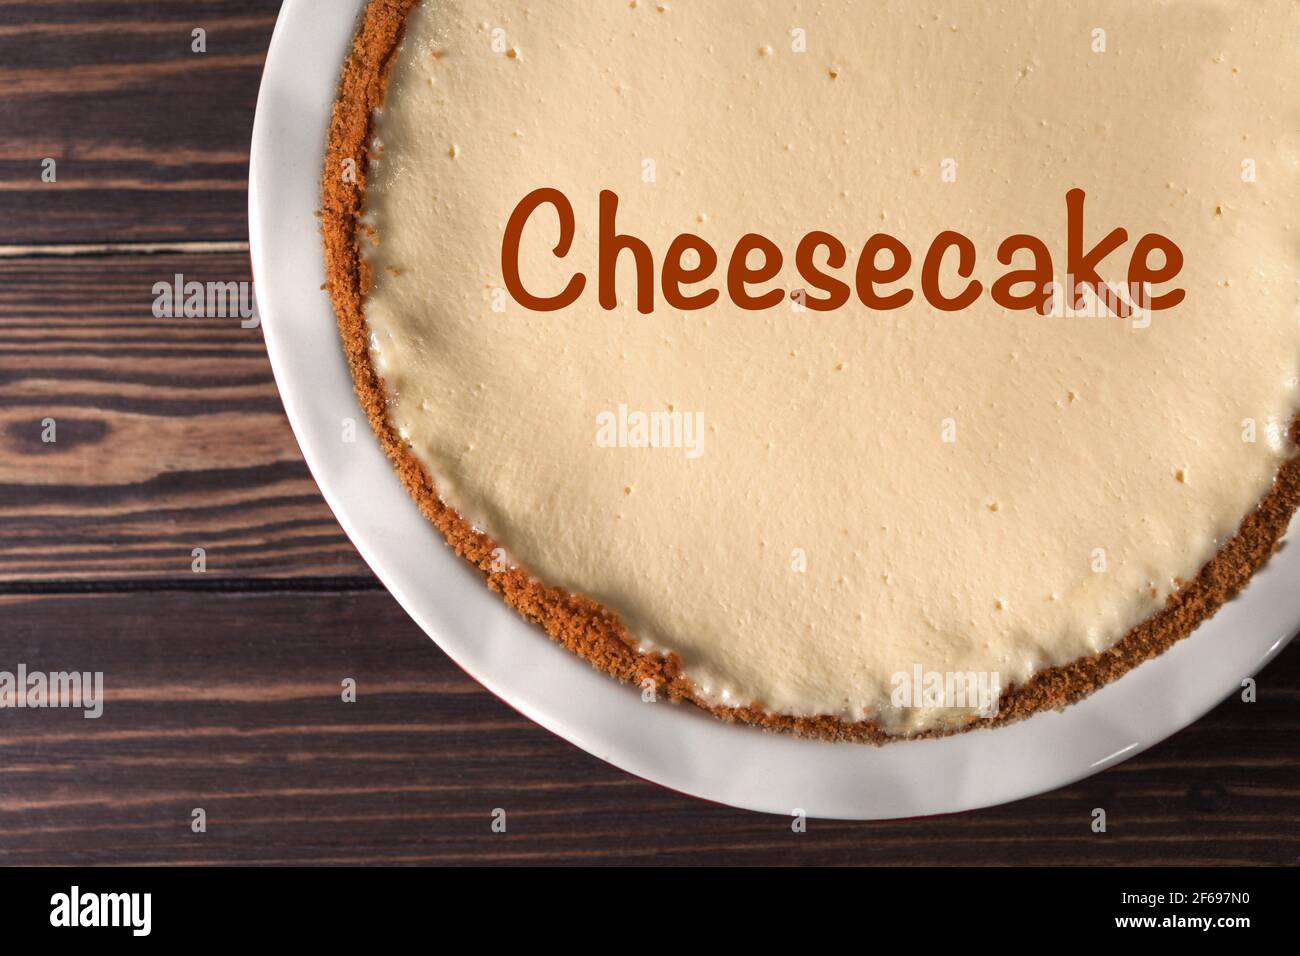 Cheesecake in a baking dish. Classic cheesecake in New York style on wooden background. Stock Photo